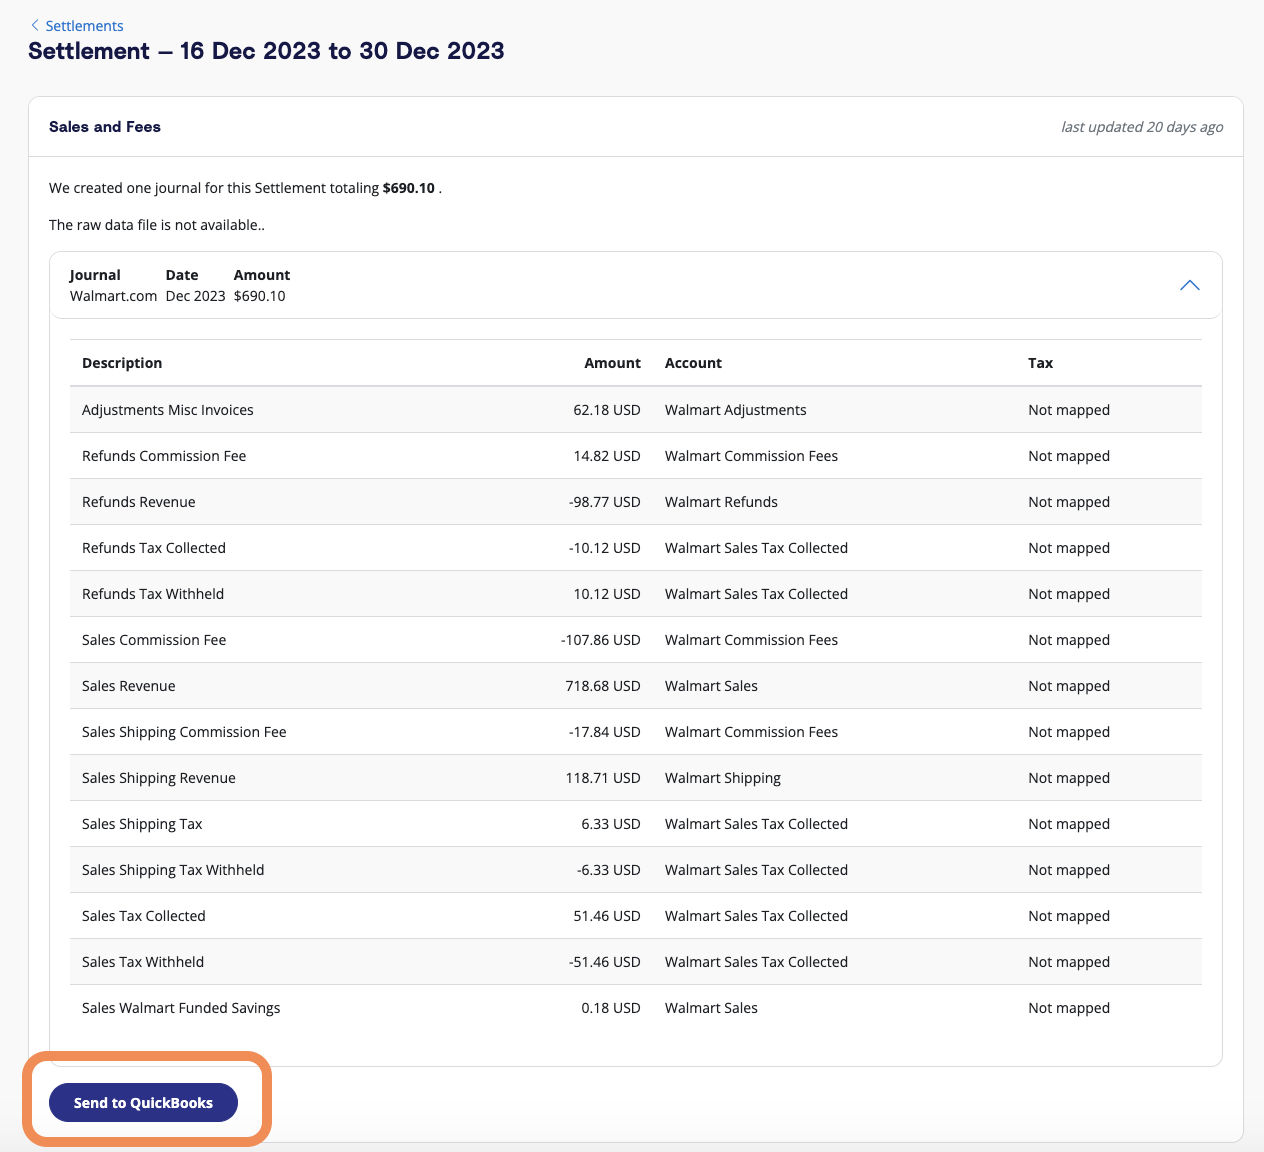 How users can click down on the dropdown arrow to review the details of a Walmart Settlement, then click 'Send to QuickBooks' to post to QBO.